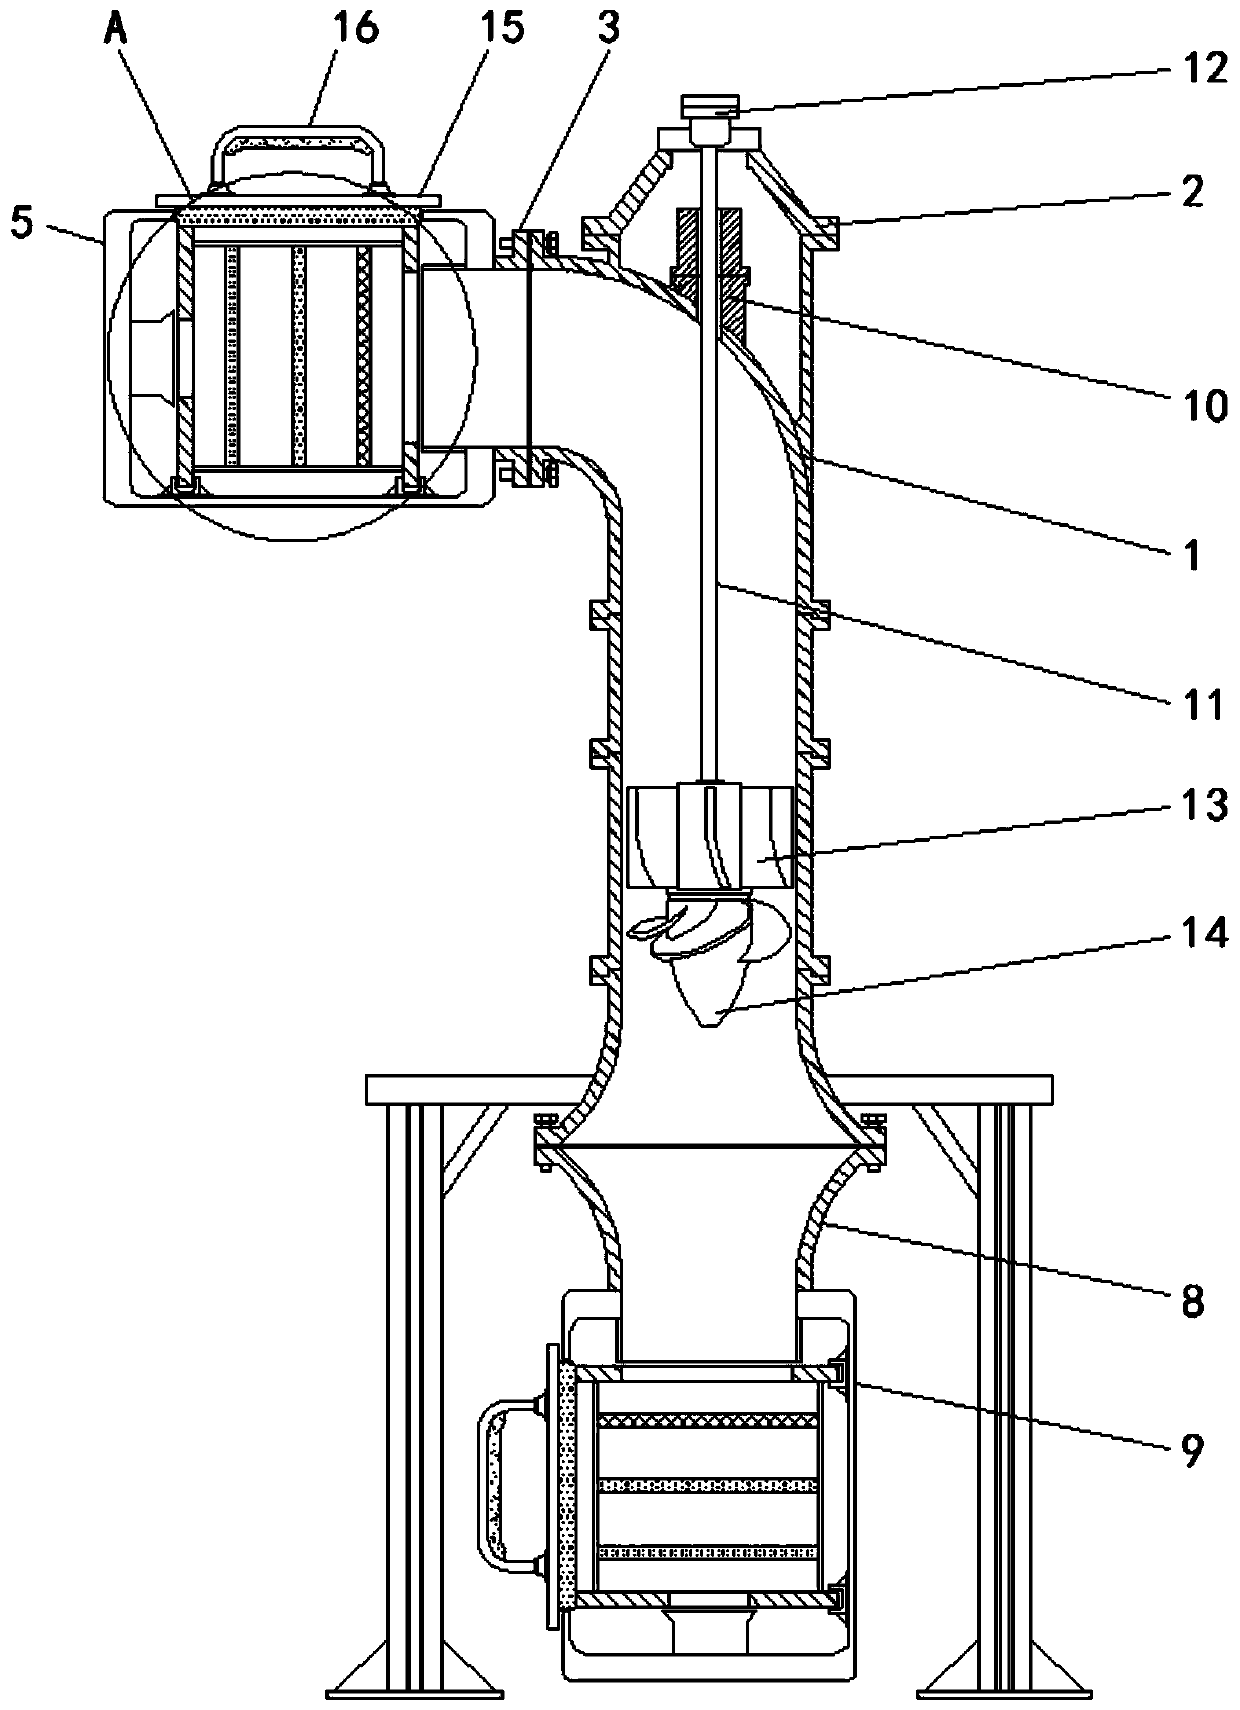 Axial flow pump with good sealing effect and unidirectional flow limiting